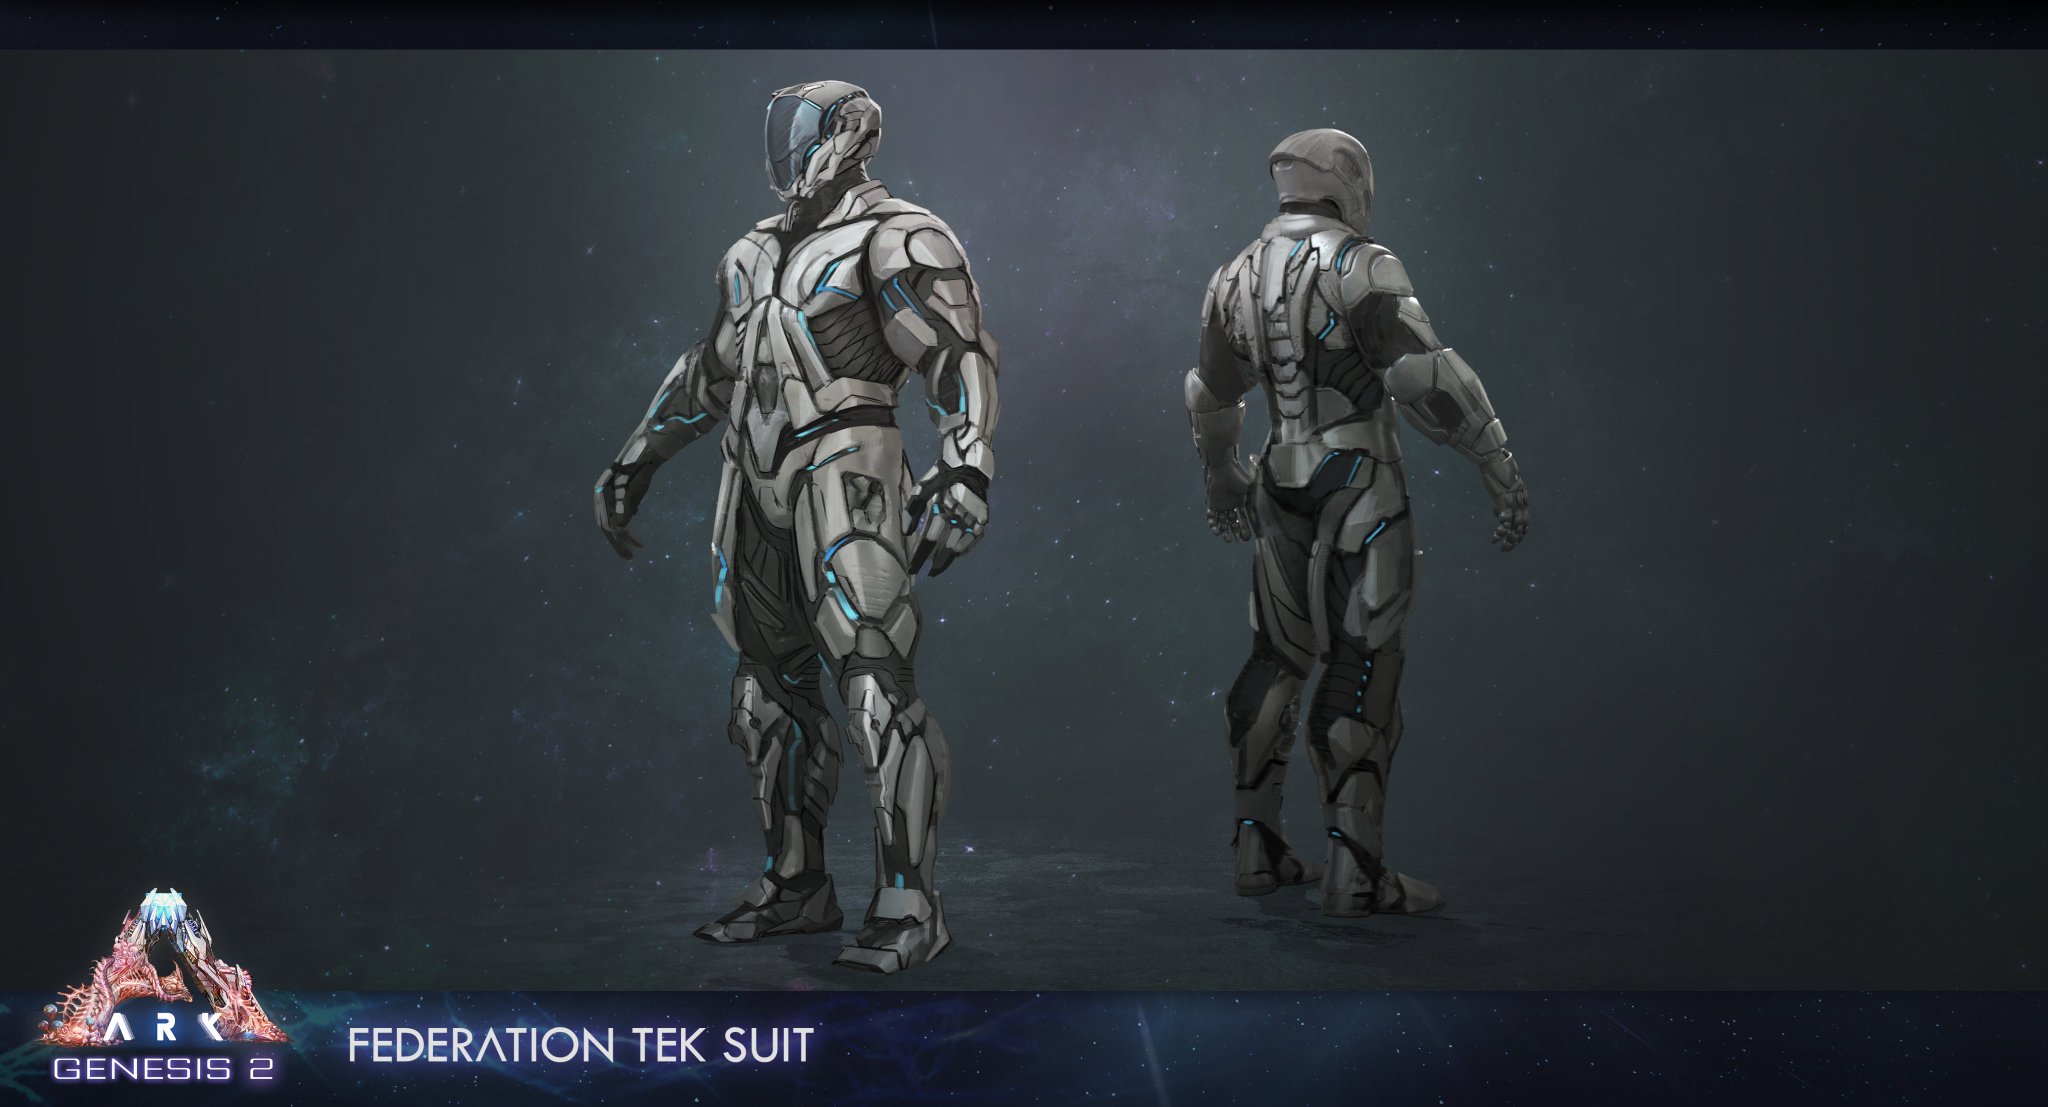 Ark Survival Evolved Suit Up Survivor You Ll Find This To Be An Upgrade From What You Experienced Wearing Inside The Genesis Simulation This Sleek Hi Tek Exo Armor Should Protect You In